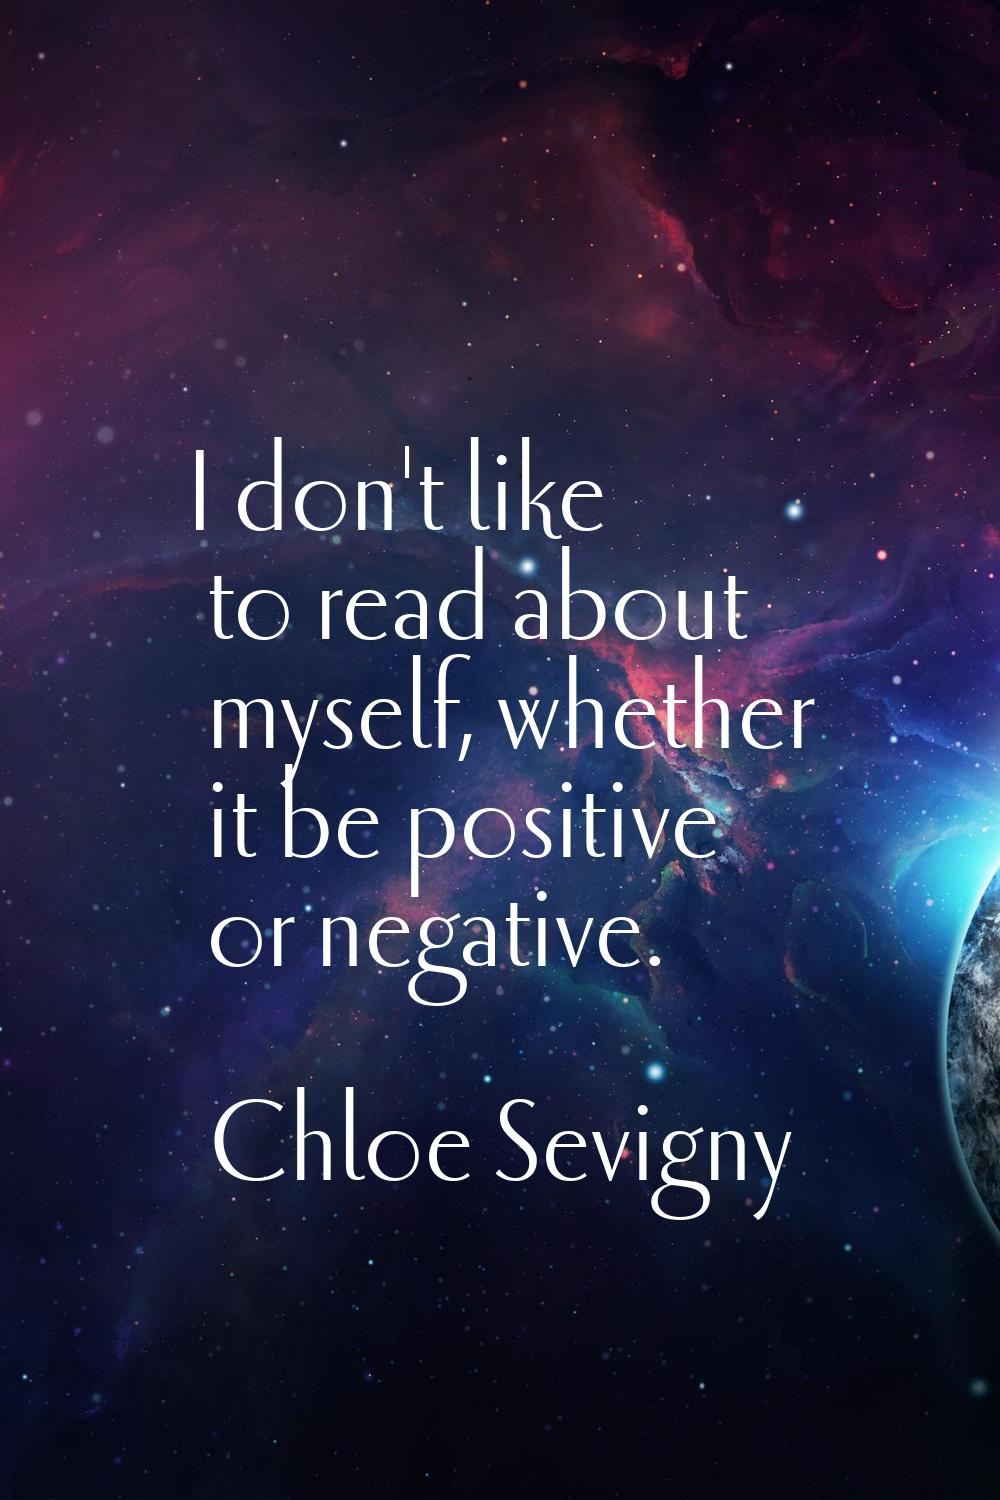 I don't like to read about myself, whether it be positive or negative.